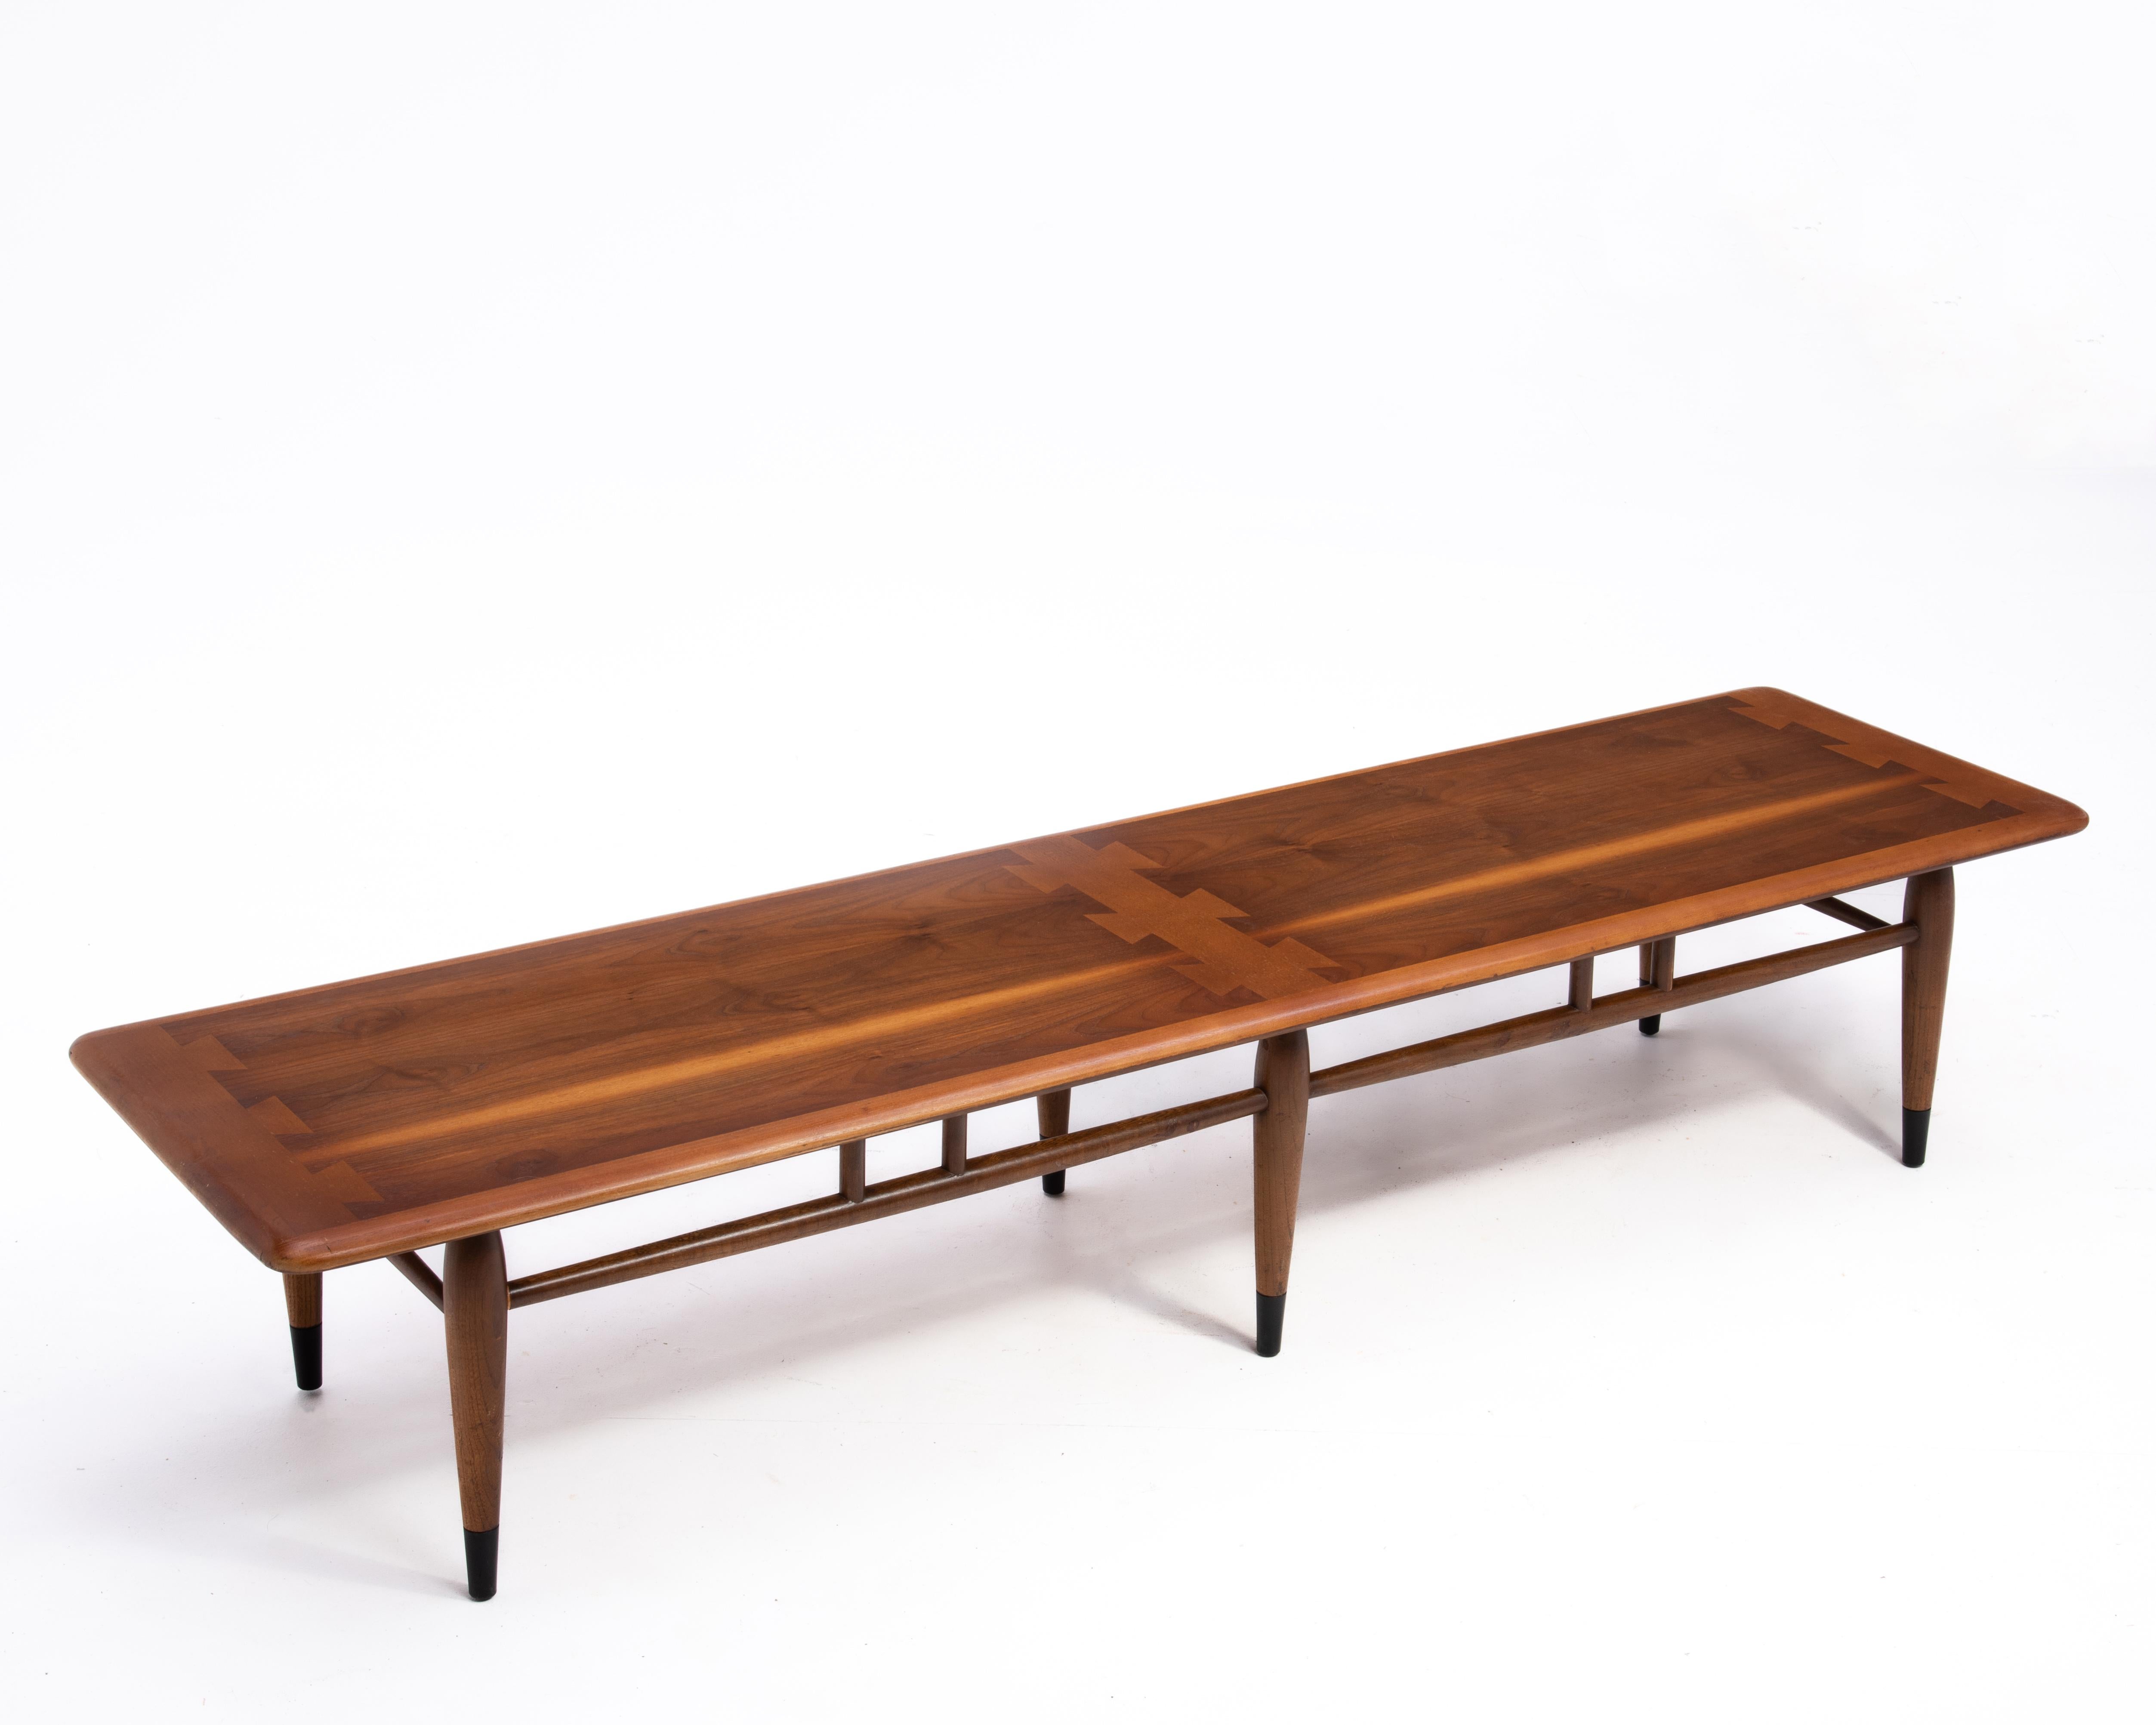 Late 20th Century Mid-Century Modern Lane Acclaim Walnut Coffee Table Andre Bus Style 900 09 For Sale